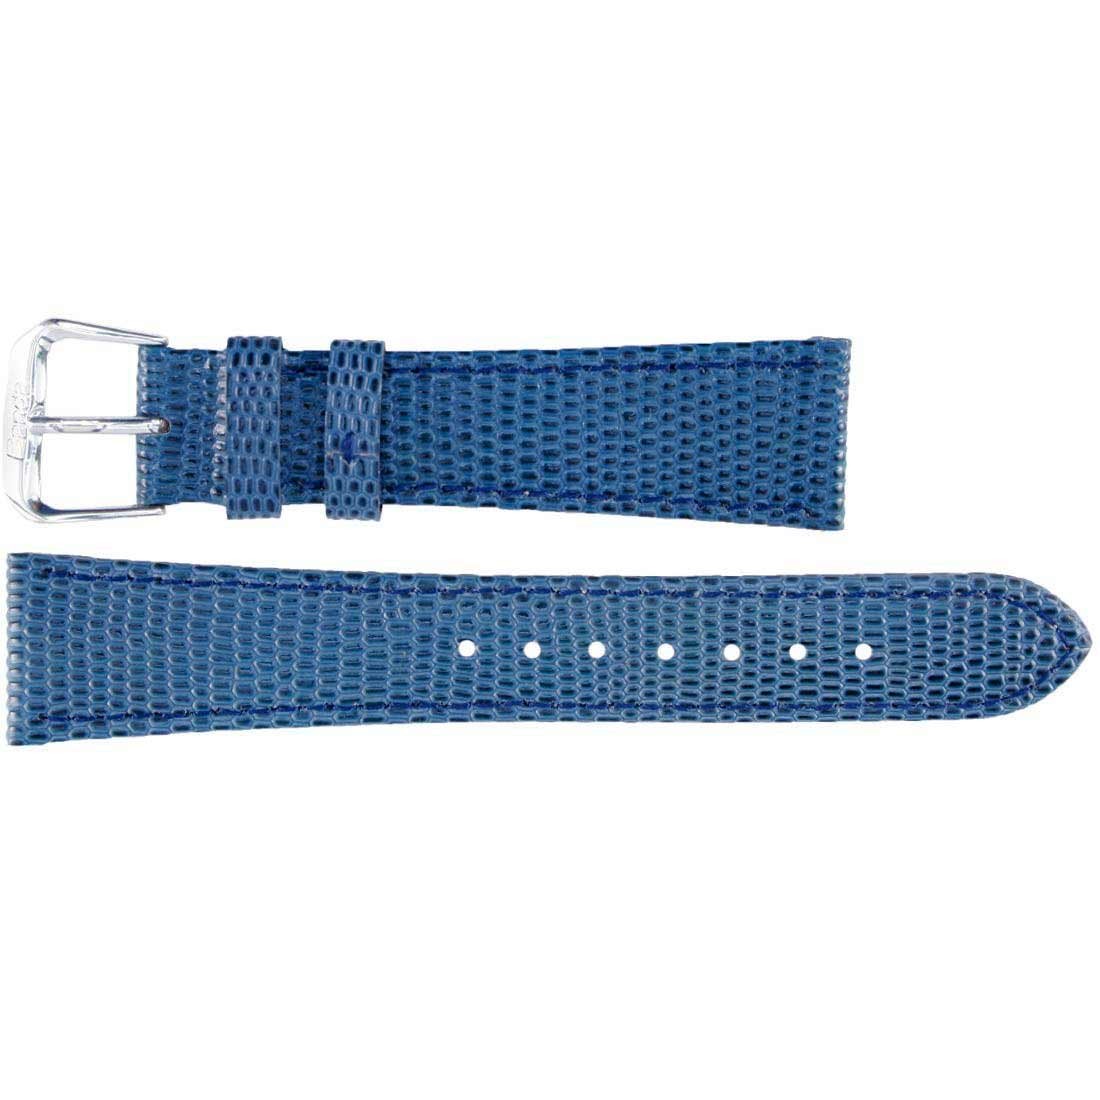 Alligator, ostrich, lizard, python, classic leather watch strap and more